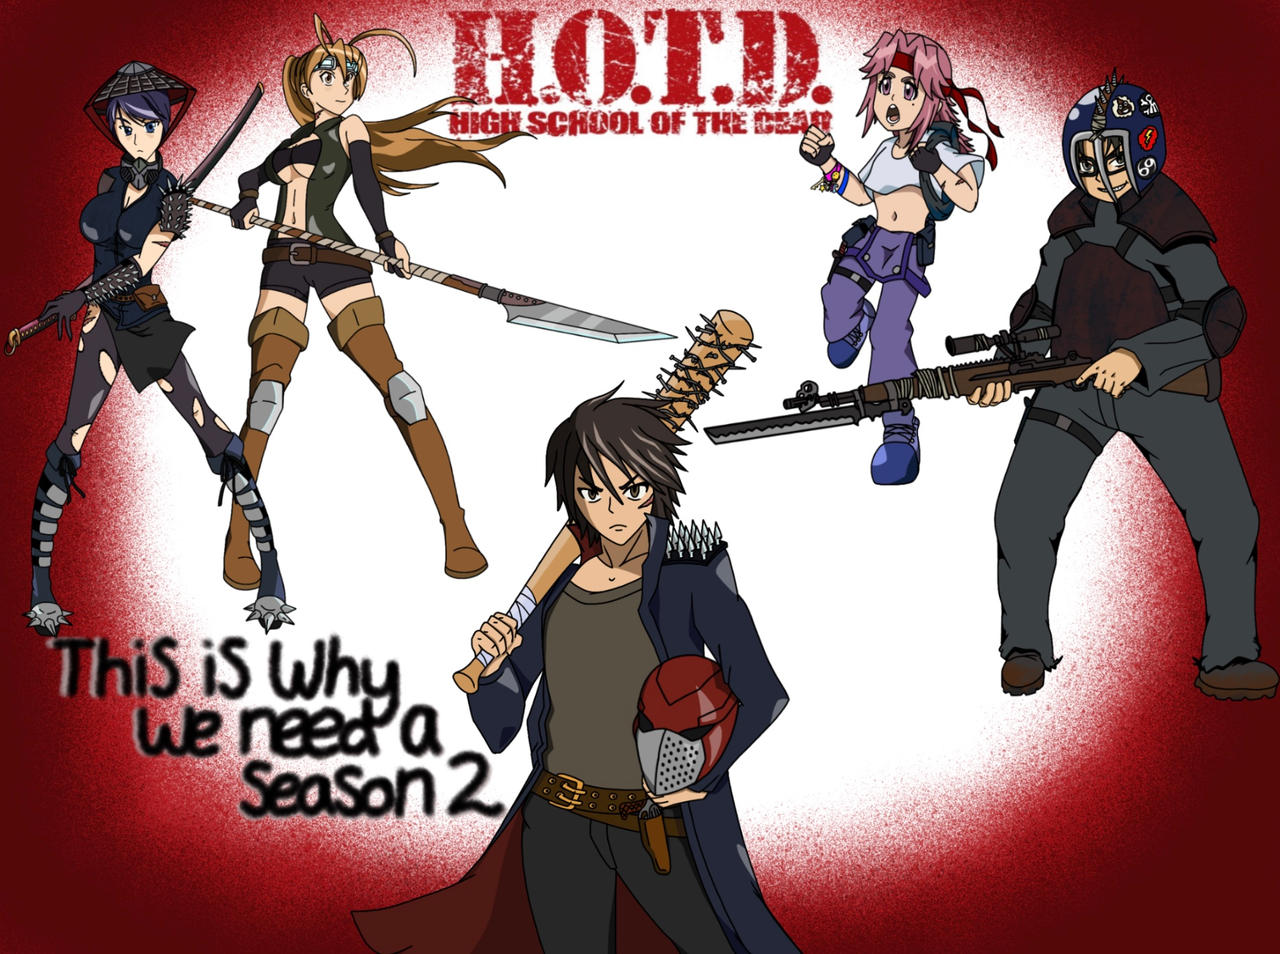 Highschool Of The Dead Season 2 - All You Need To Know